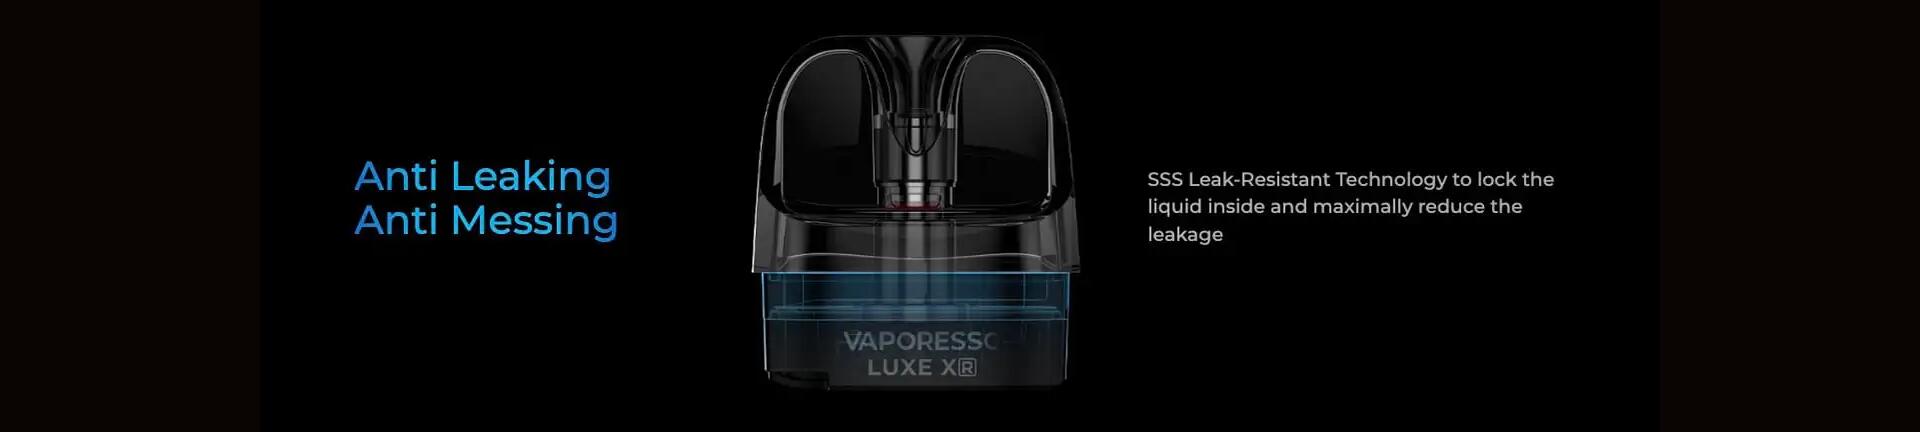 Vaporesso Luxe X Pods Anti-Leaking Technology